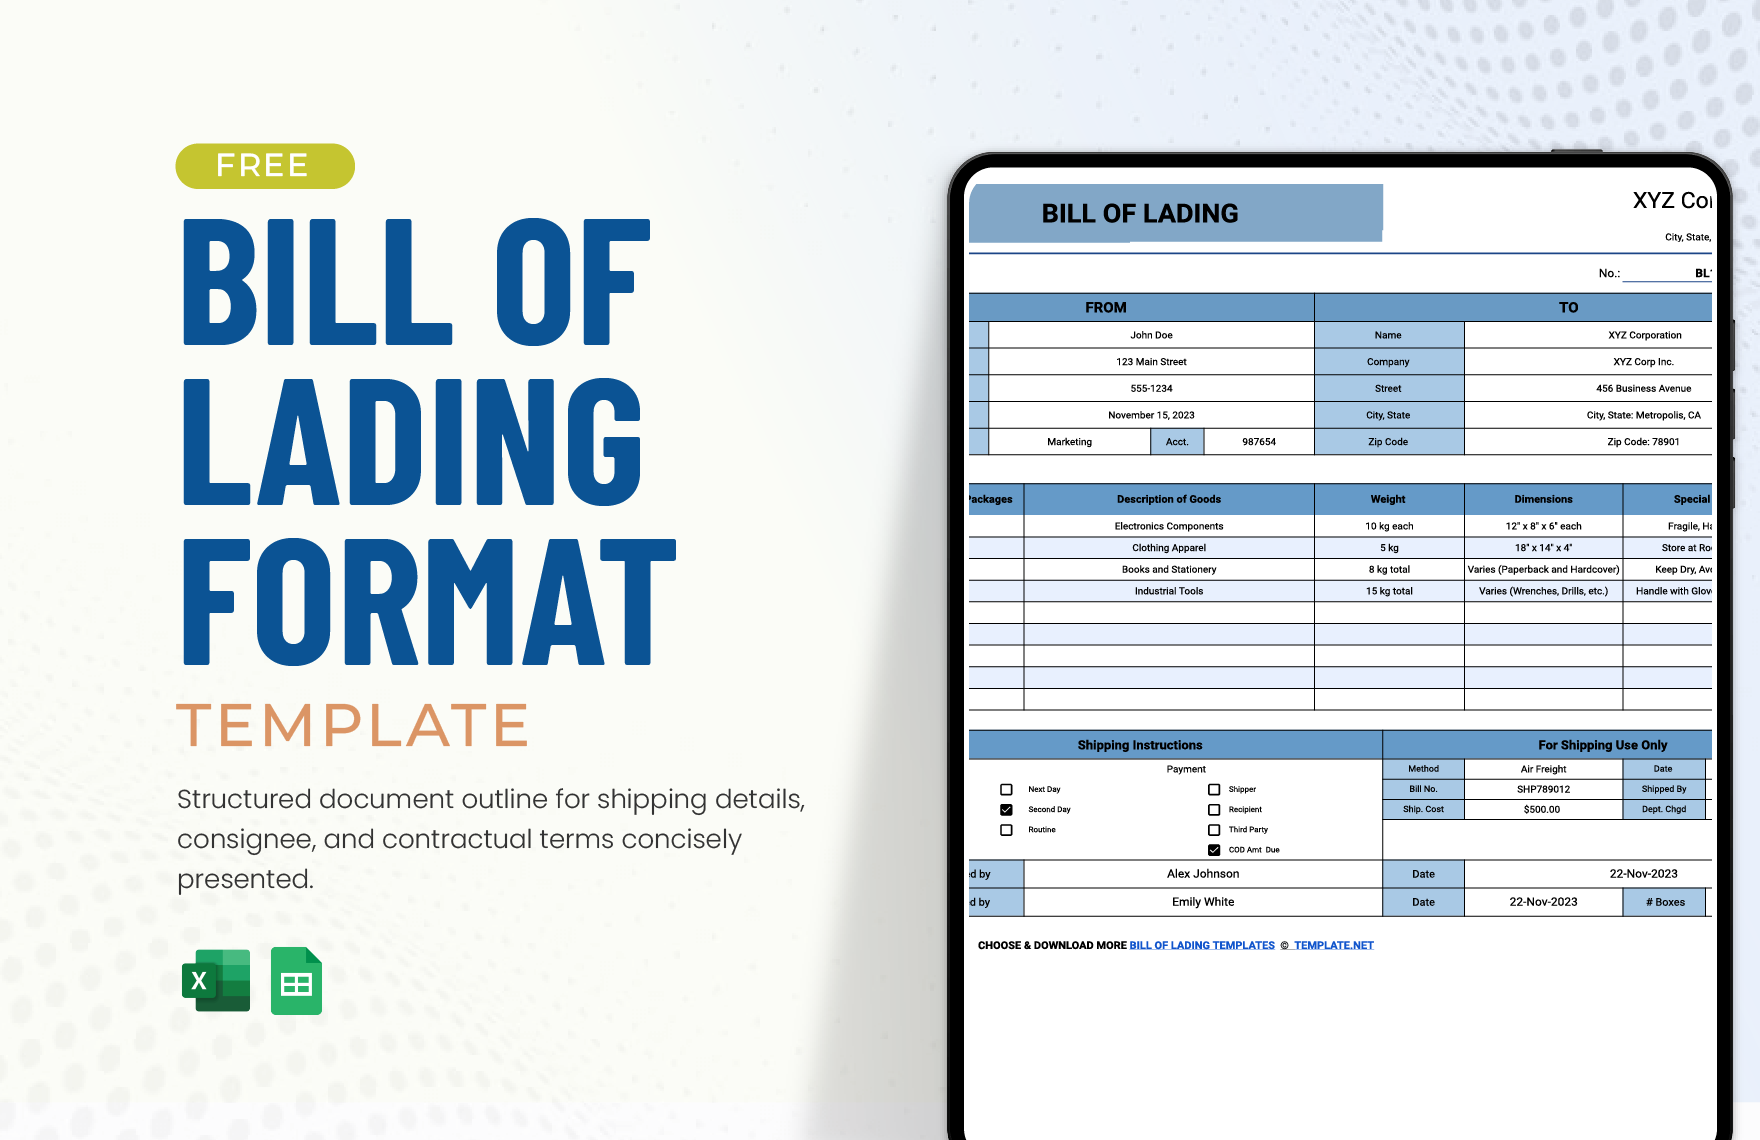 Bill of Lading Format Template